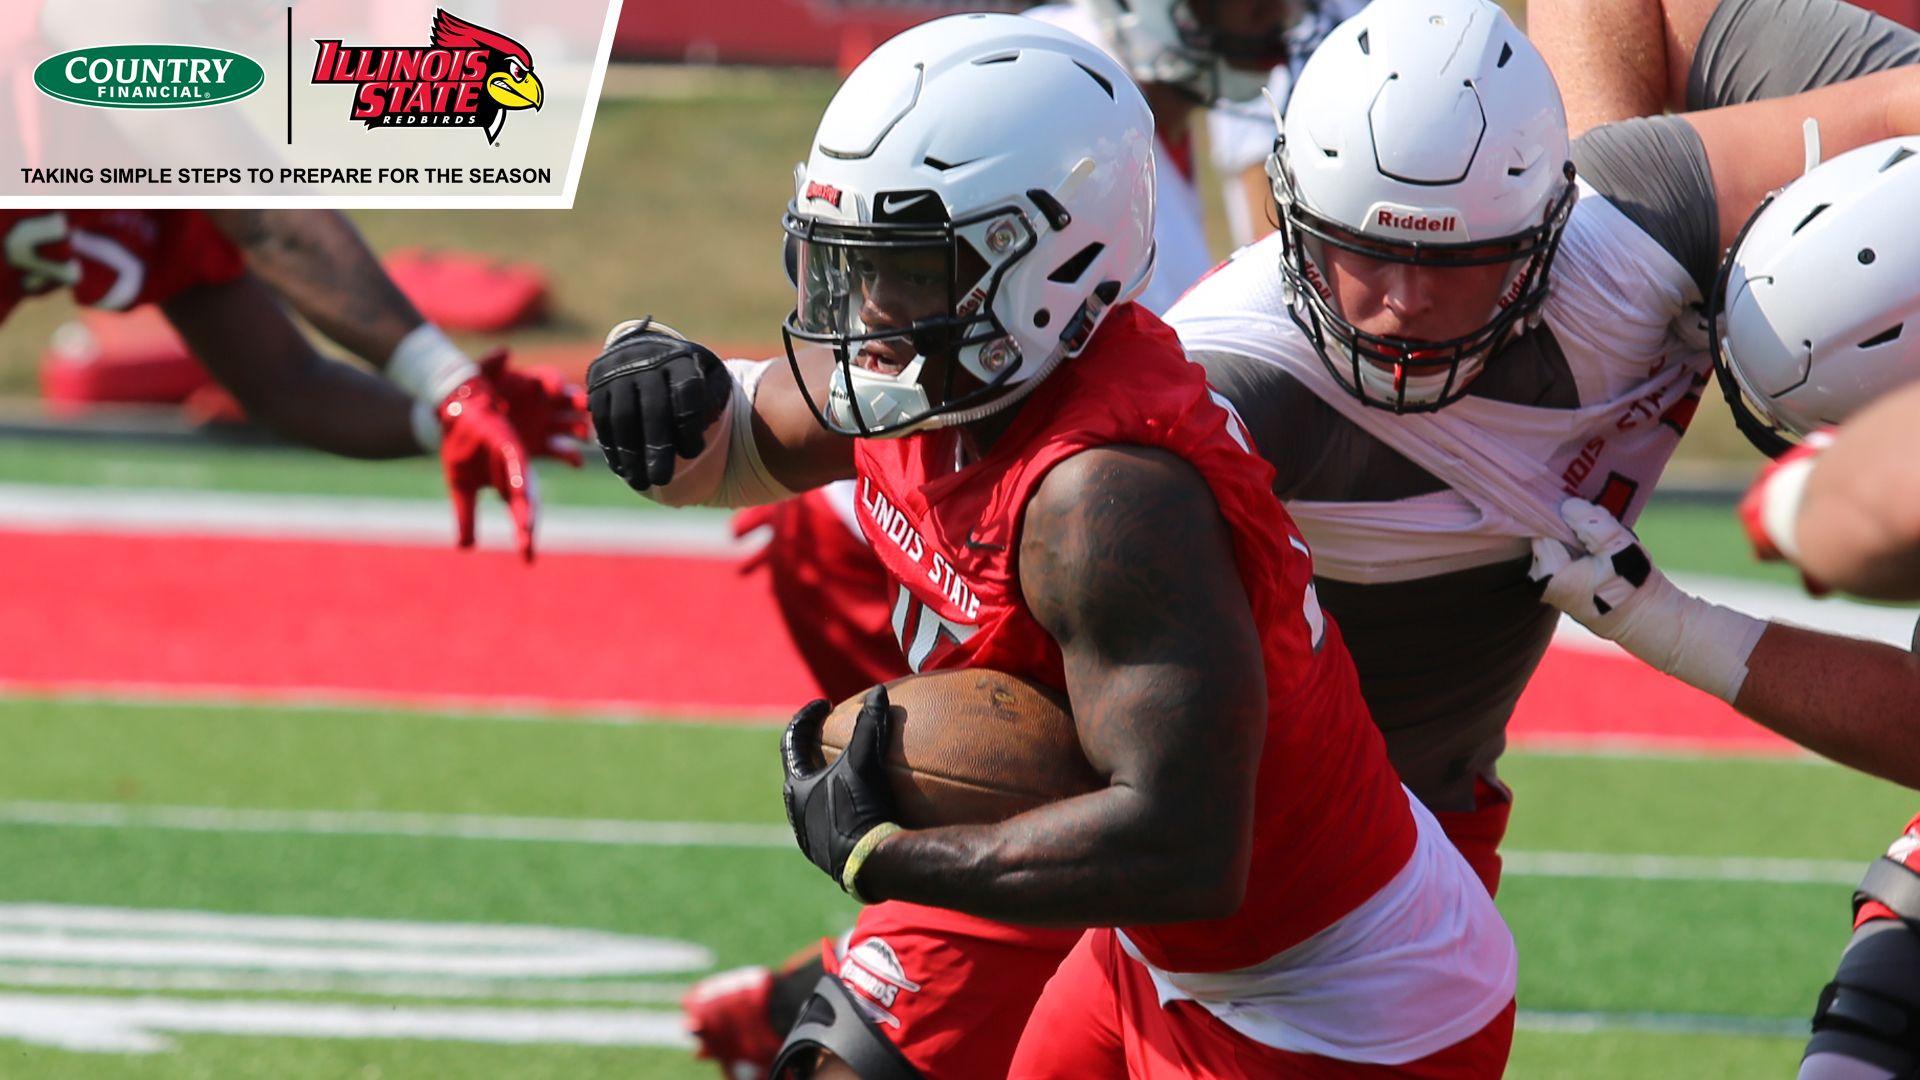 Illinois State Redbirds Football Logo - Fall Camp Report 1: The 'Birds Are Back - Illinois State University ...